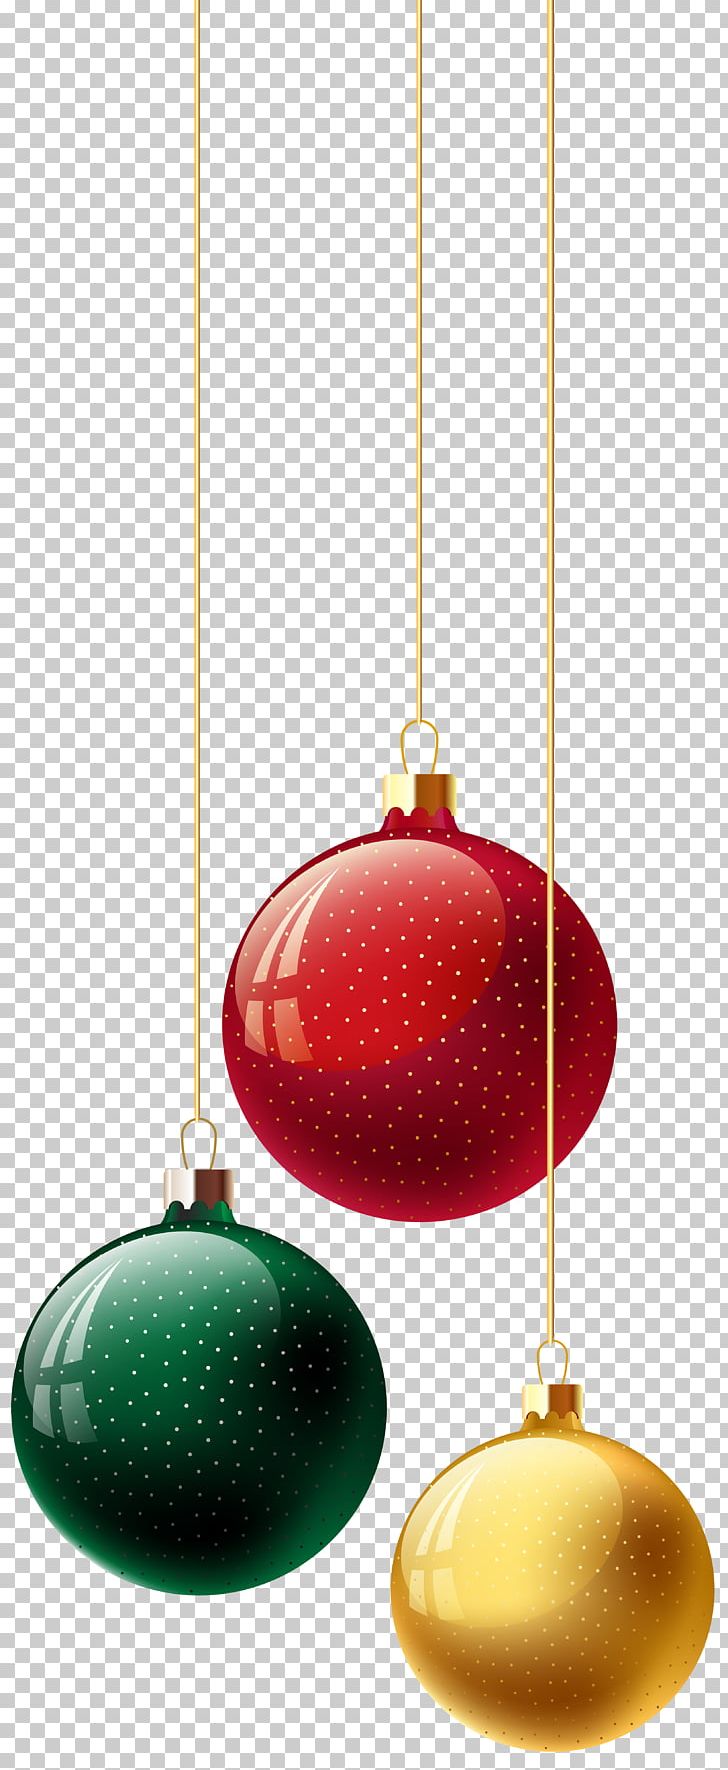 Christmas Ornament Design Product PNG, Clipart, Balls, Book, Christmas, Christmas Balls, Christmas Clipart Free PNG Download